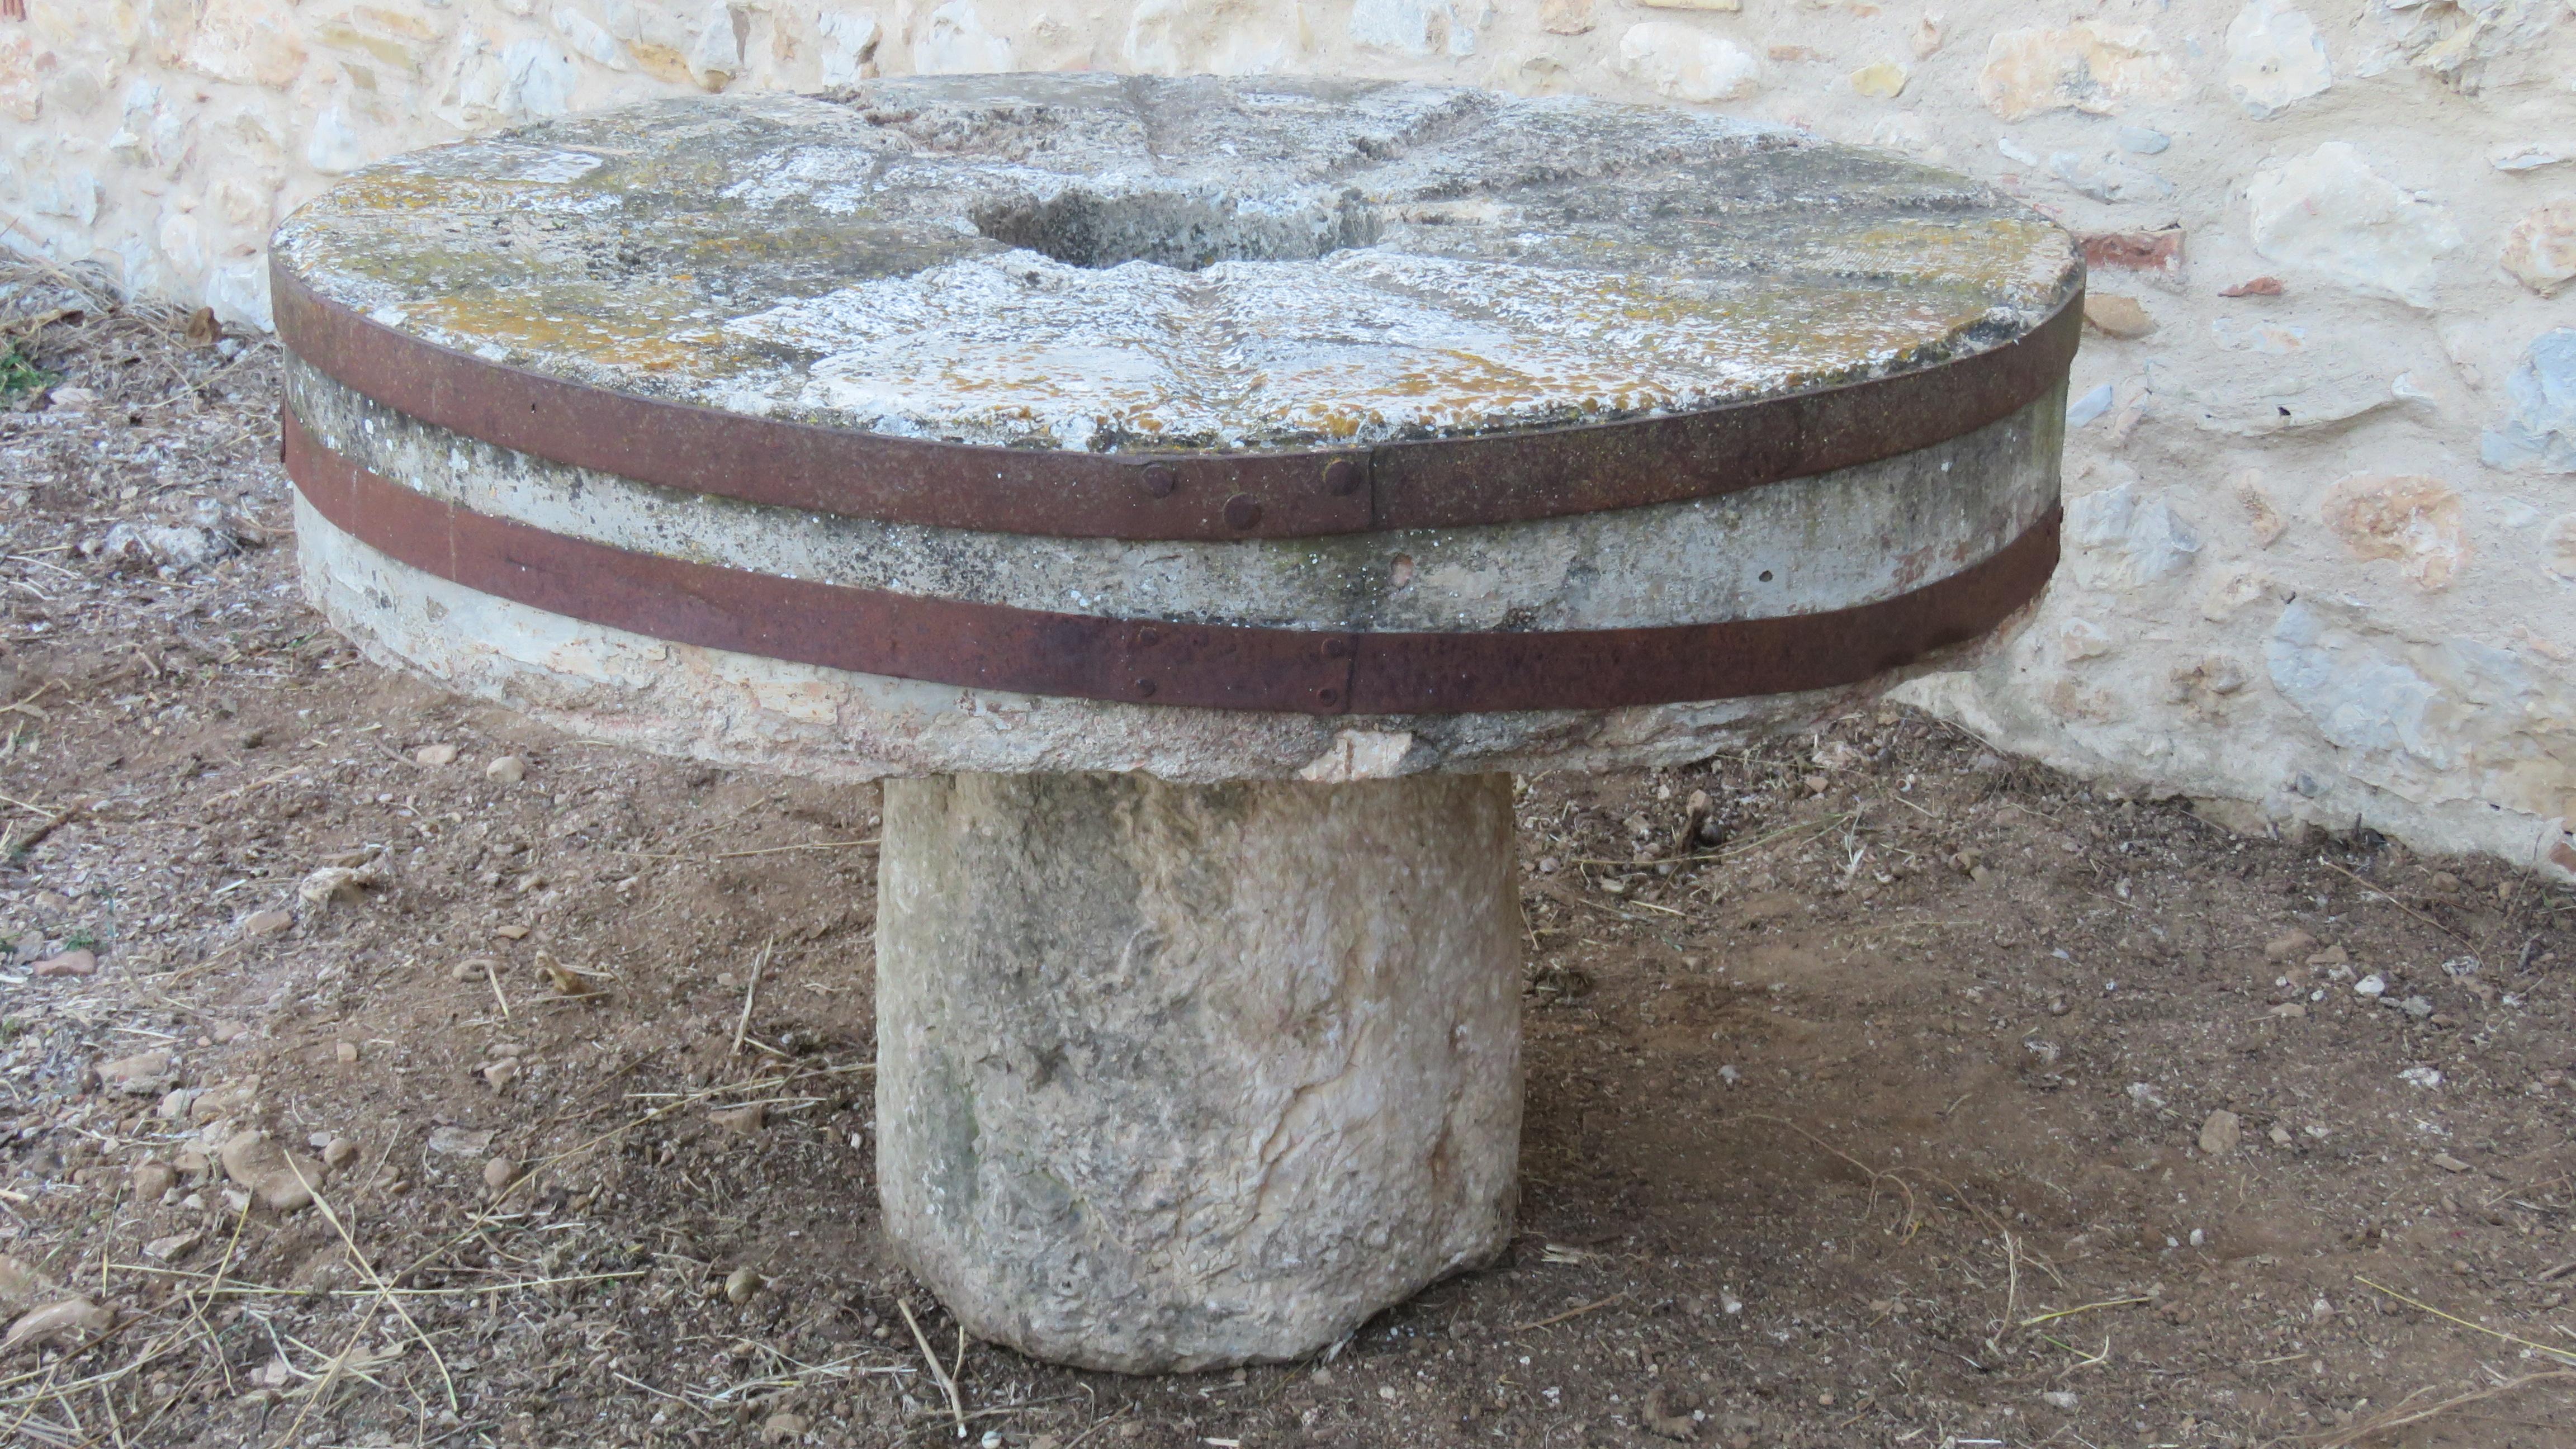 The thick circular millstone top joined with two wrought iron decks raised on round rough-hewn base. On the centre top there is a whole that can be used to place a planter. Both stones show many age signs and beautiful patina.

Measures: Base